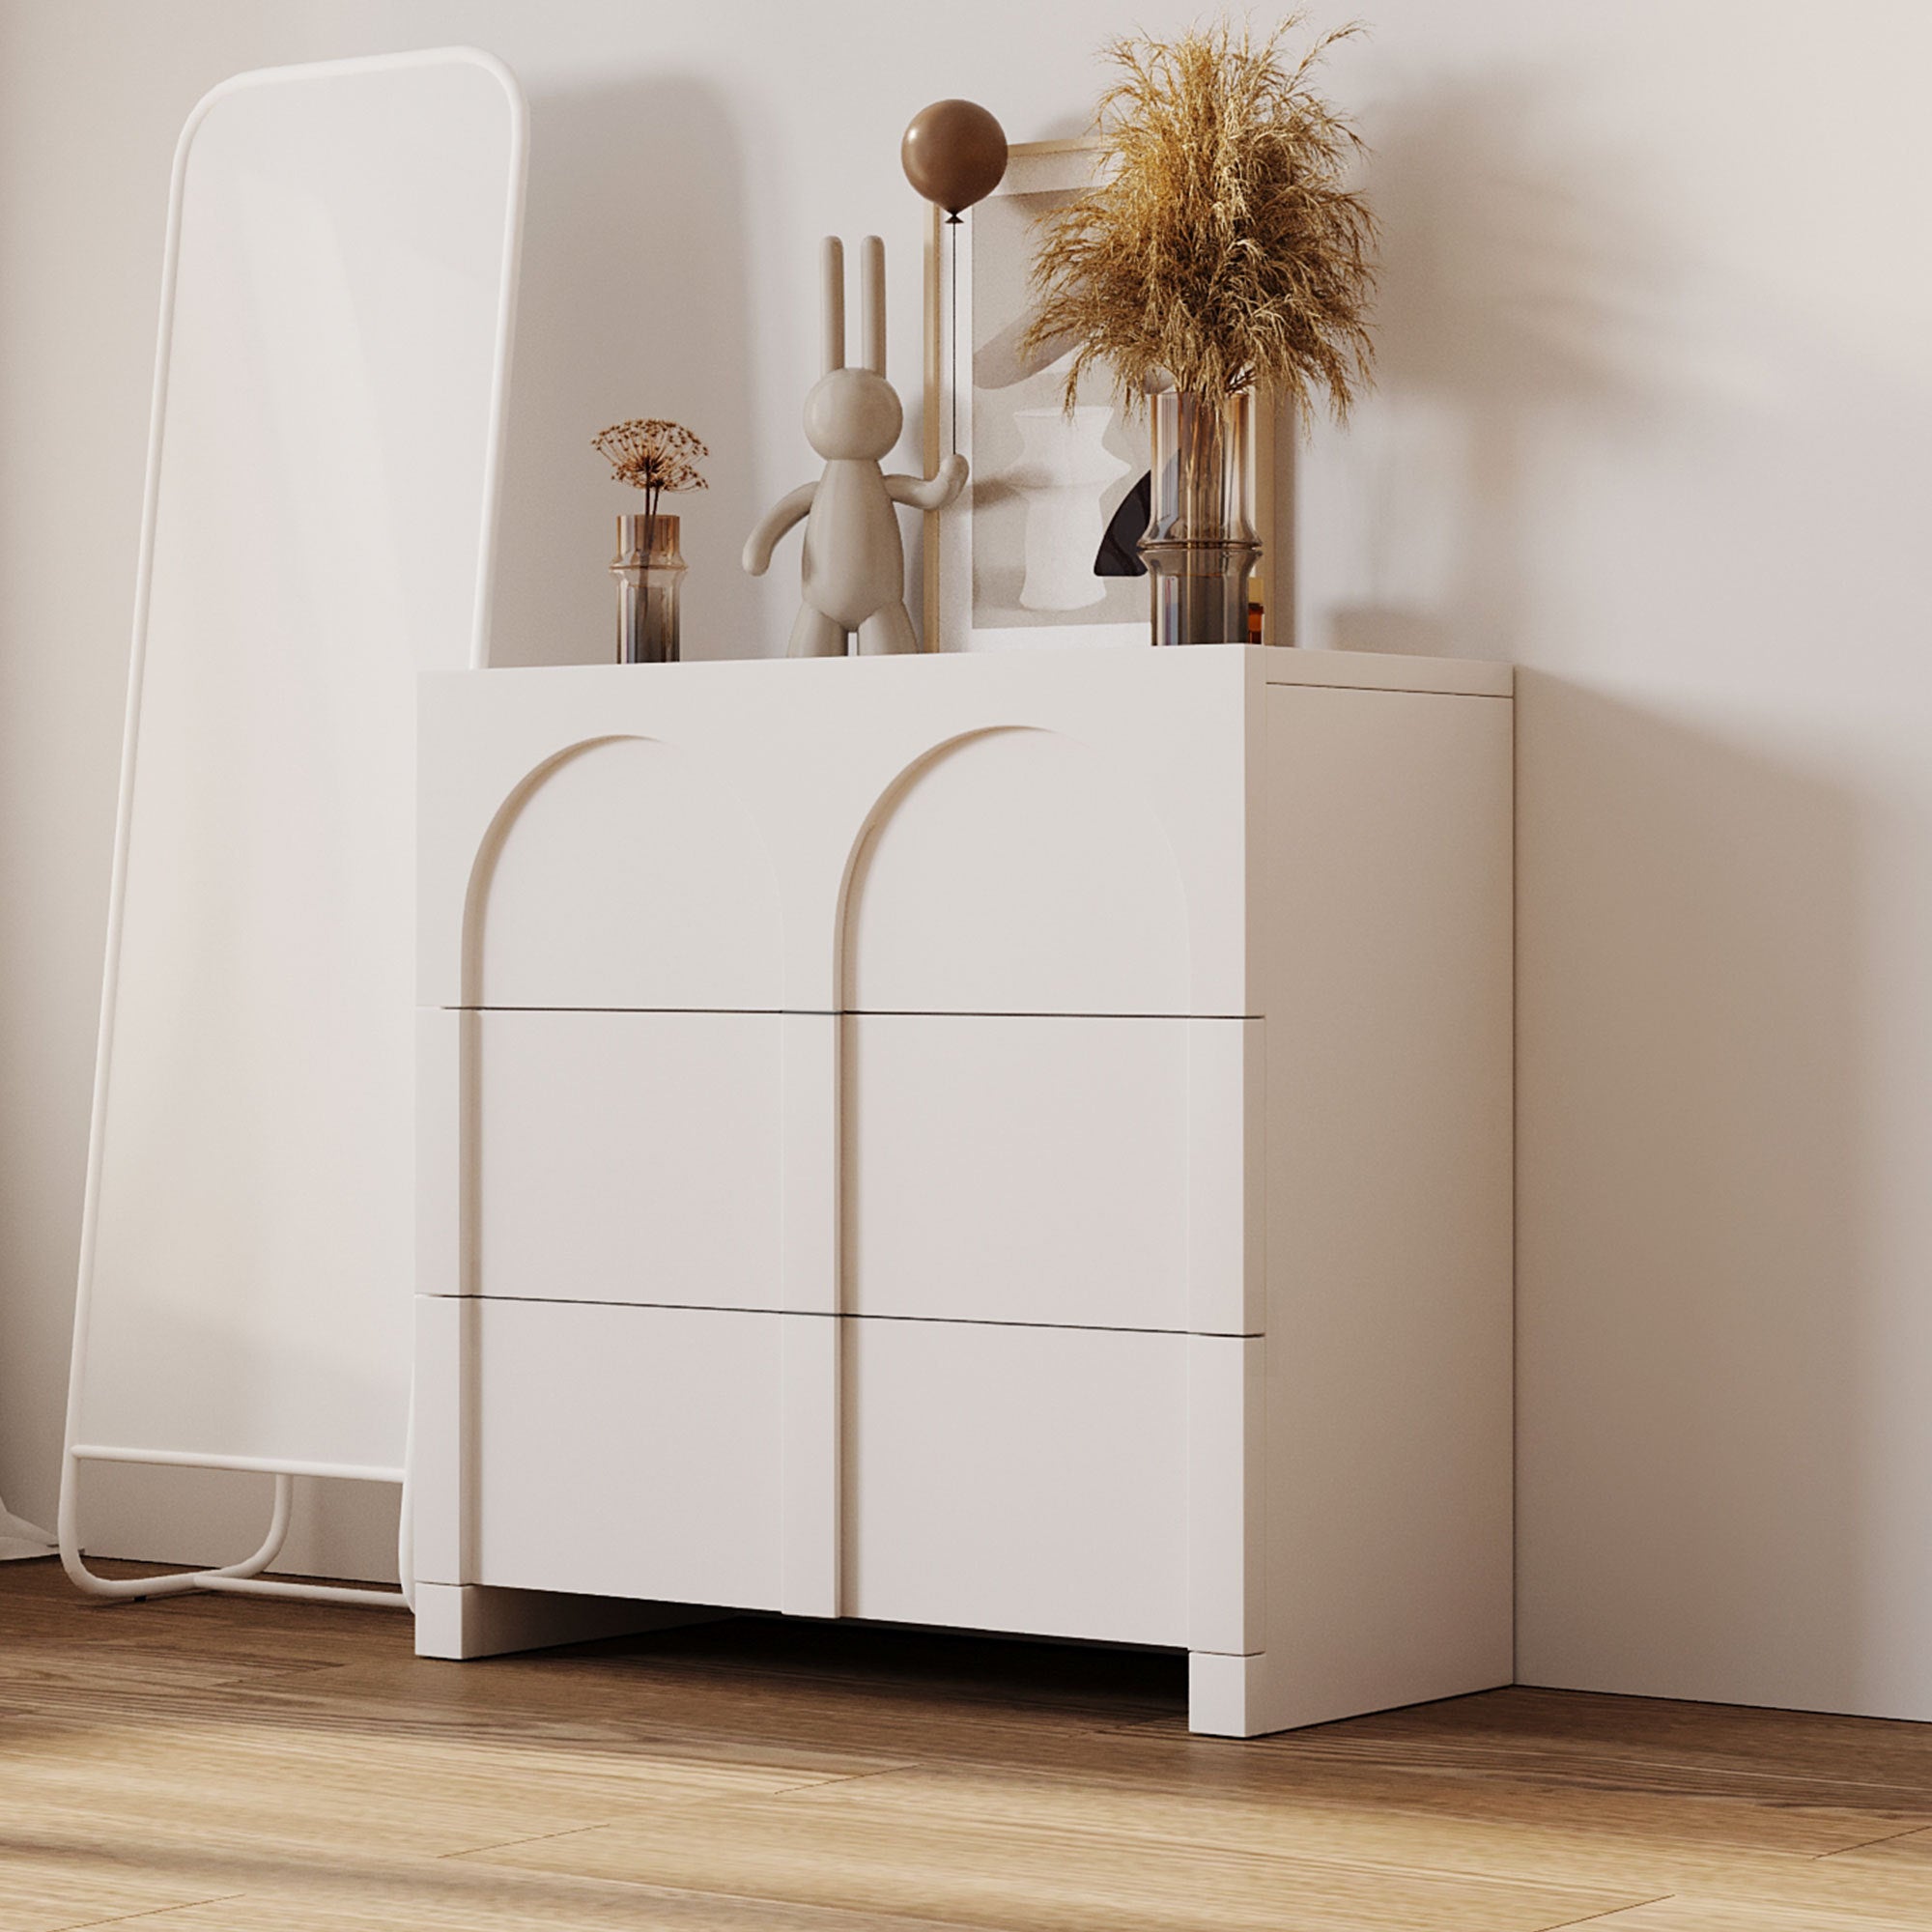 Modern Style Three-Drawer Chest Sideboard Cabinet Ample Storage Spaces  - Half Gloss White